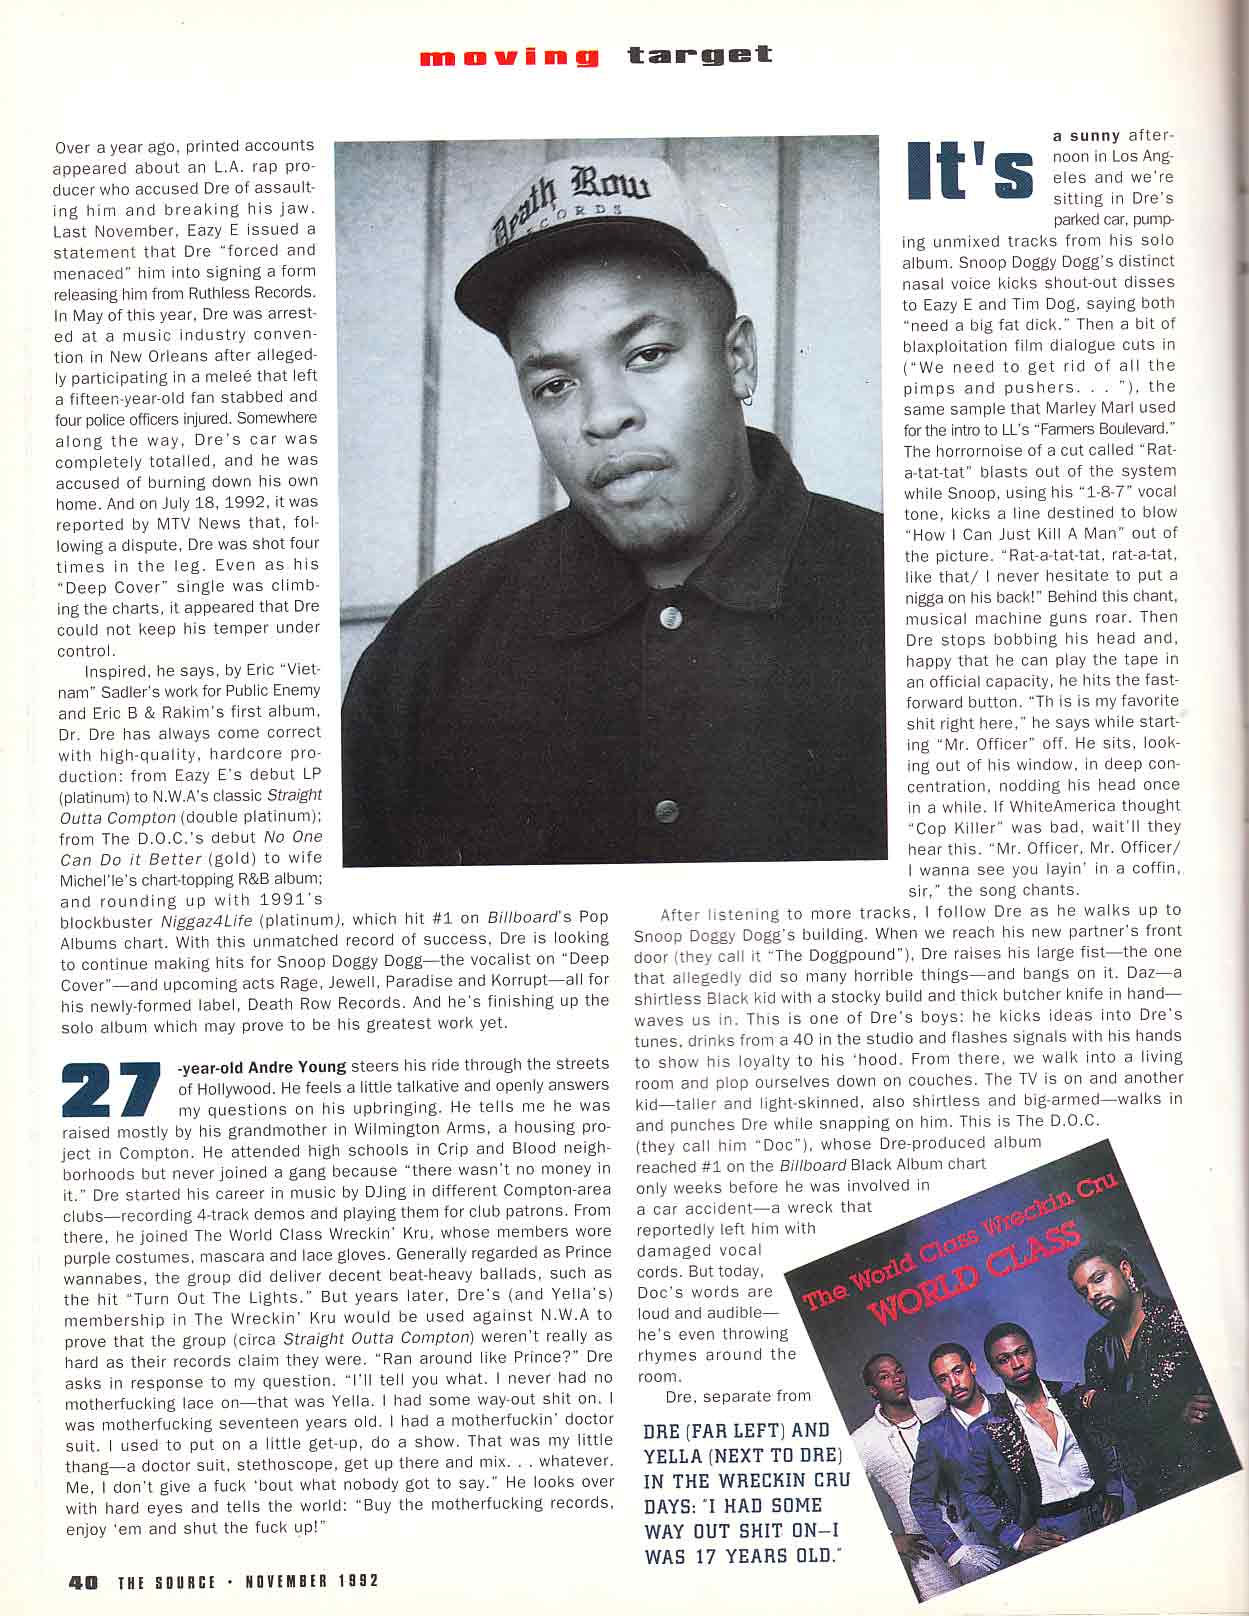 Dr Dre feature in The Source (1992 